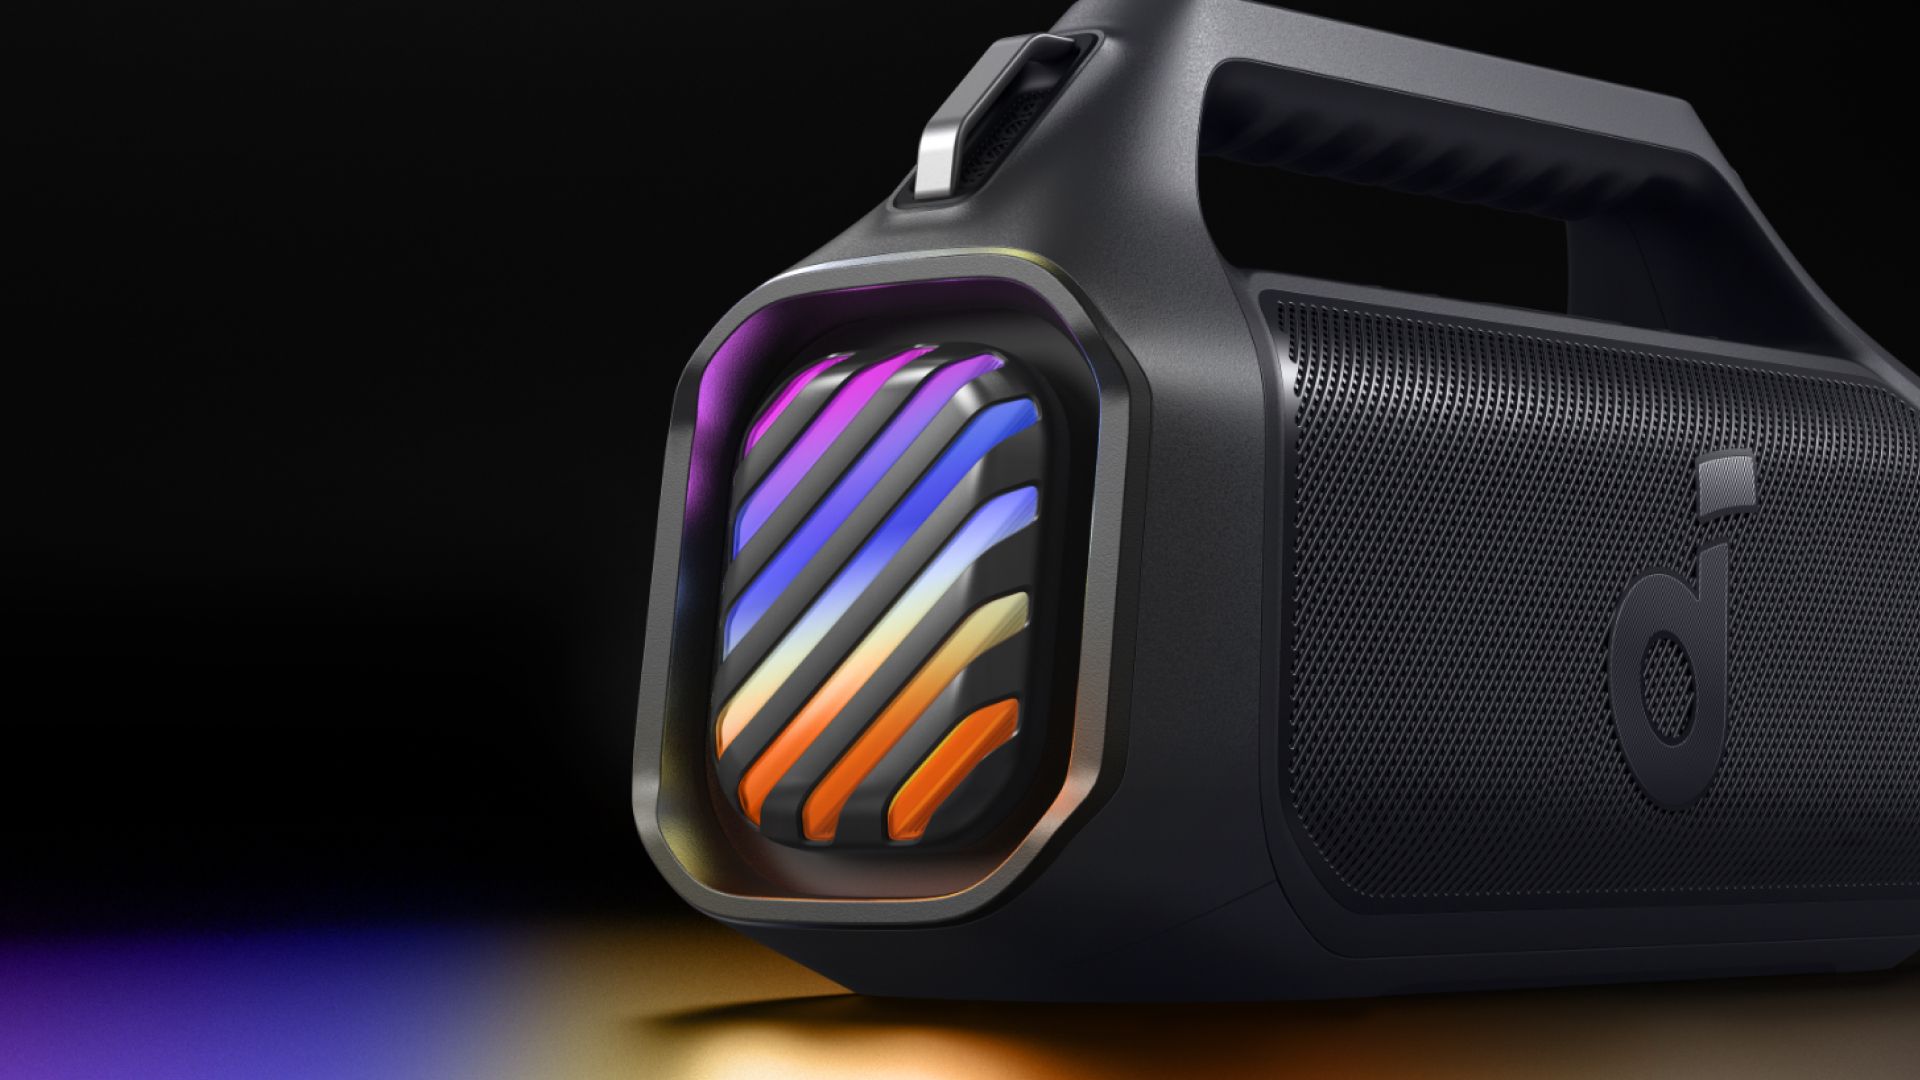 Soundcore’s new speaker boasts booming bass and a light show